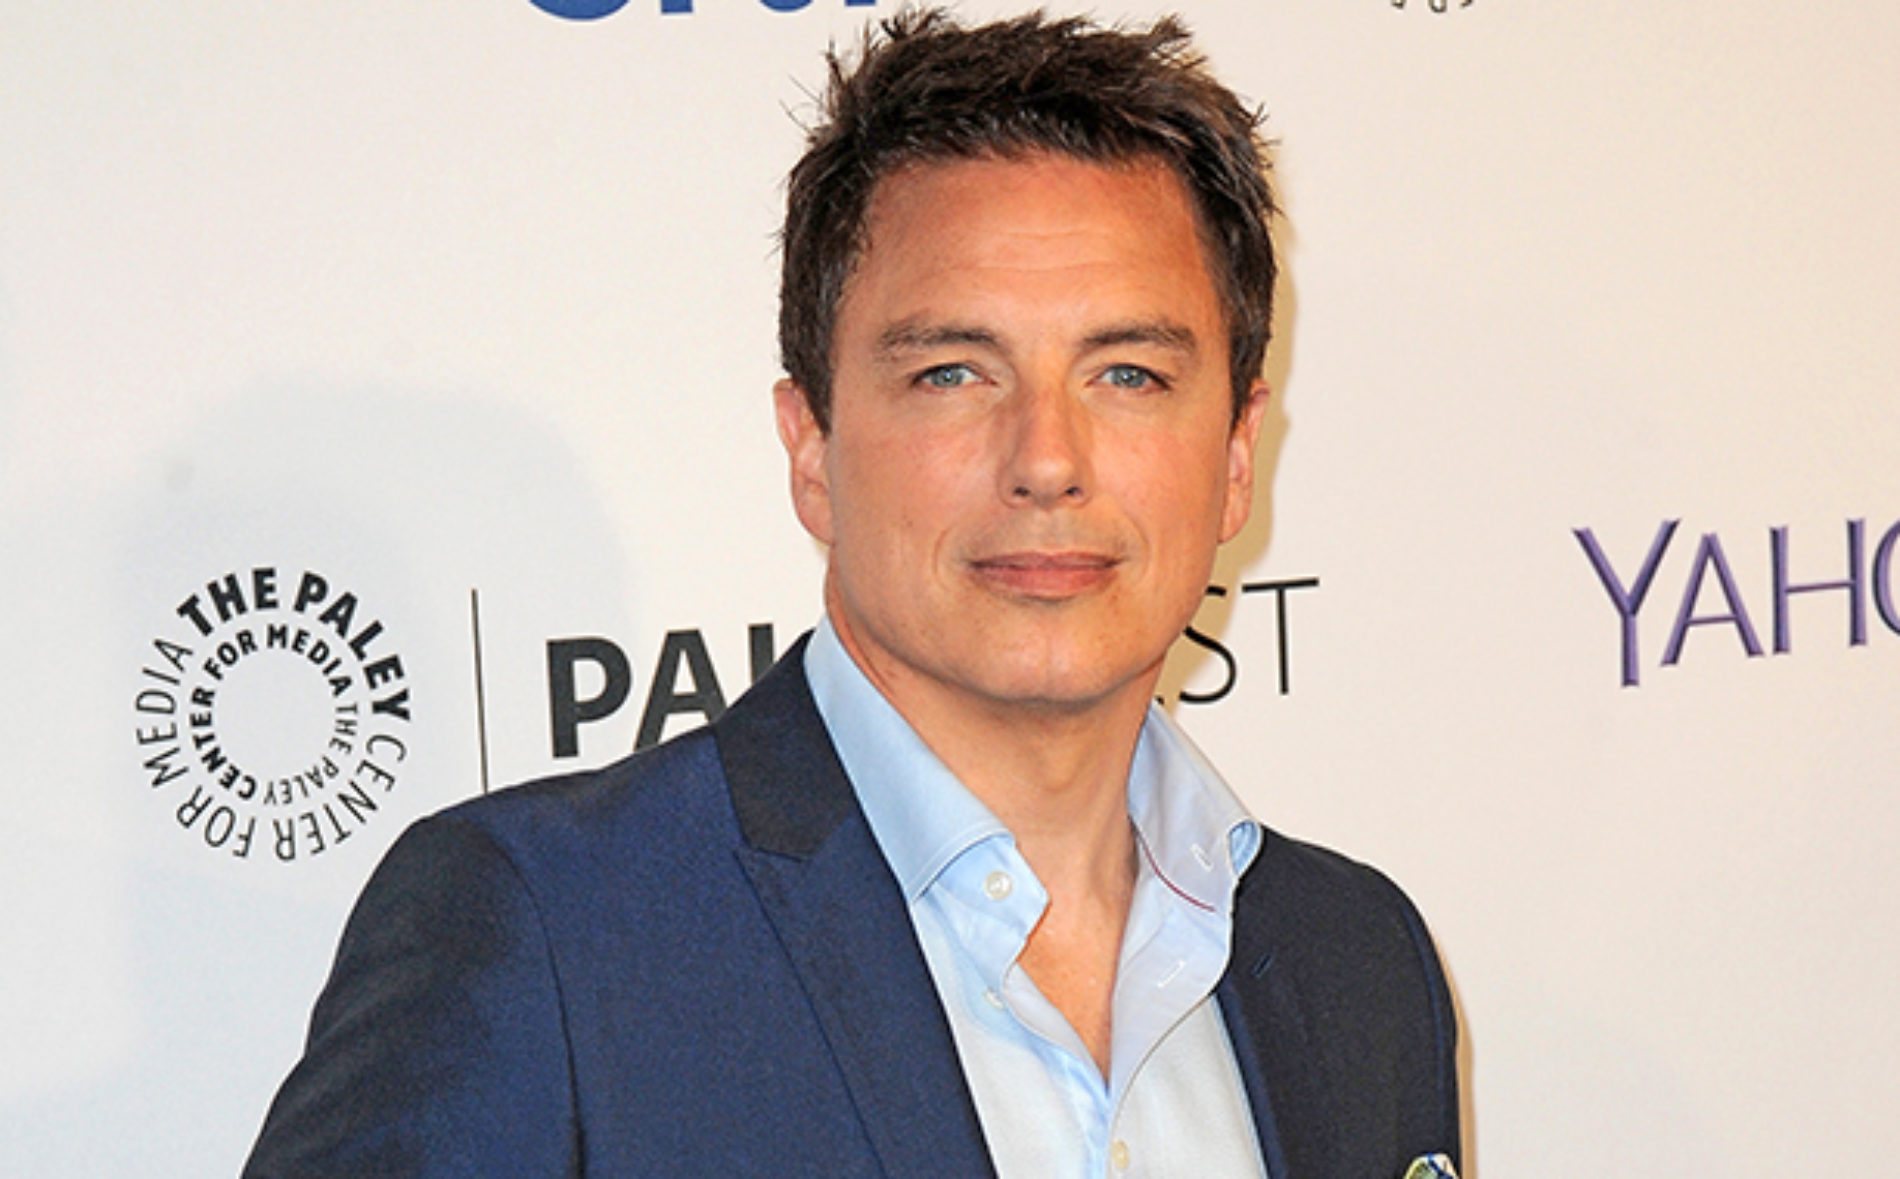 John Barrowman refused to lie about being gay and lost his job on Television